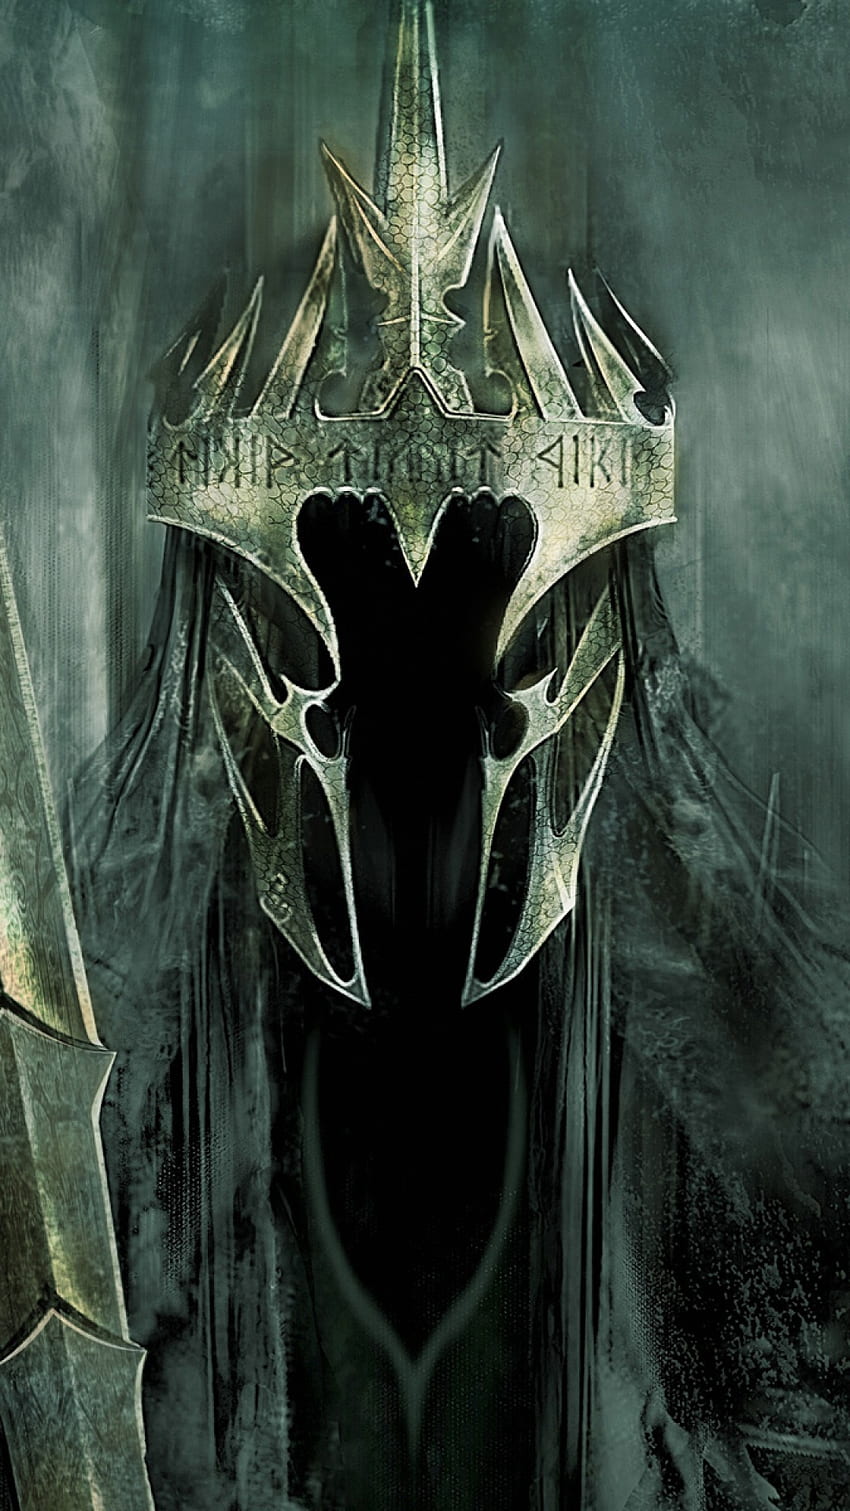 Nazgul Lord of the Rings - HTC One M9 Terbaik wallpaper ponsel HD